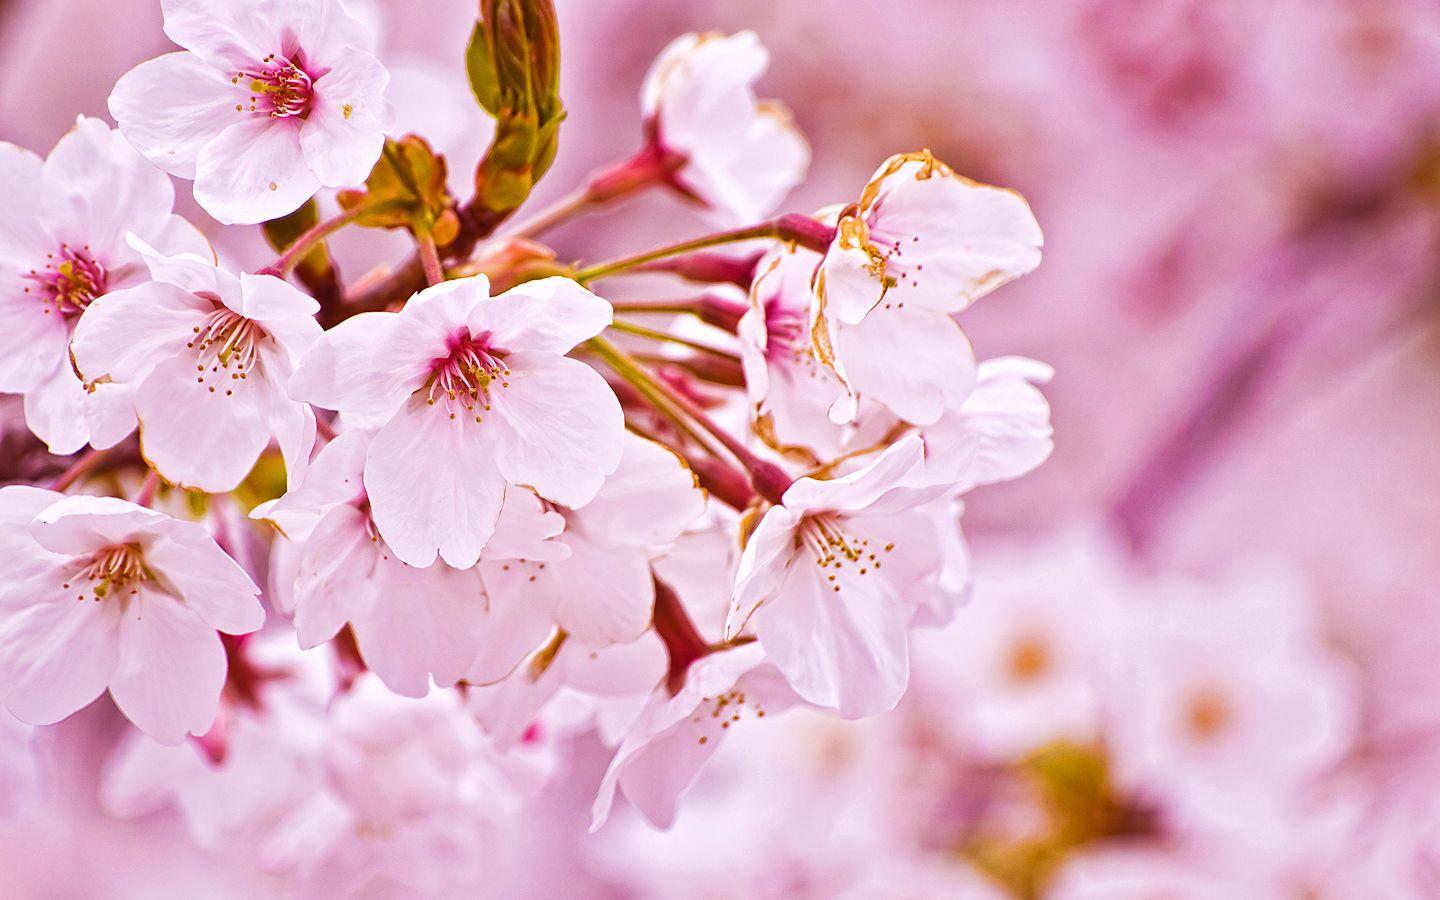 Cartoon Cherry Blossom Wallpapers - Top Free Cartoon Cherry Blossom